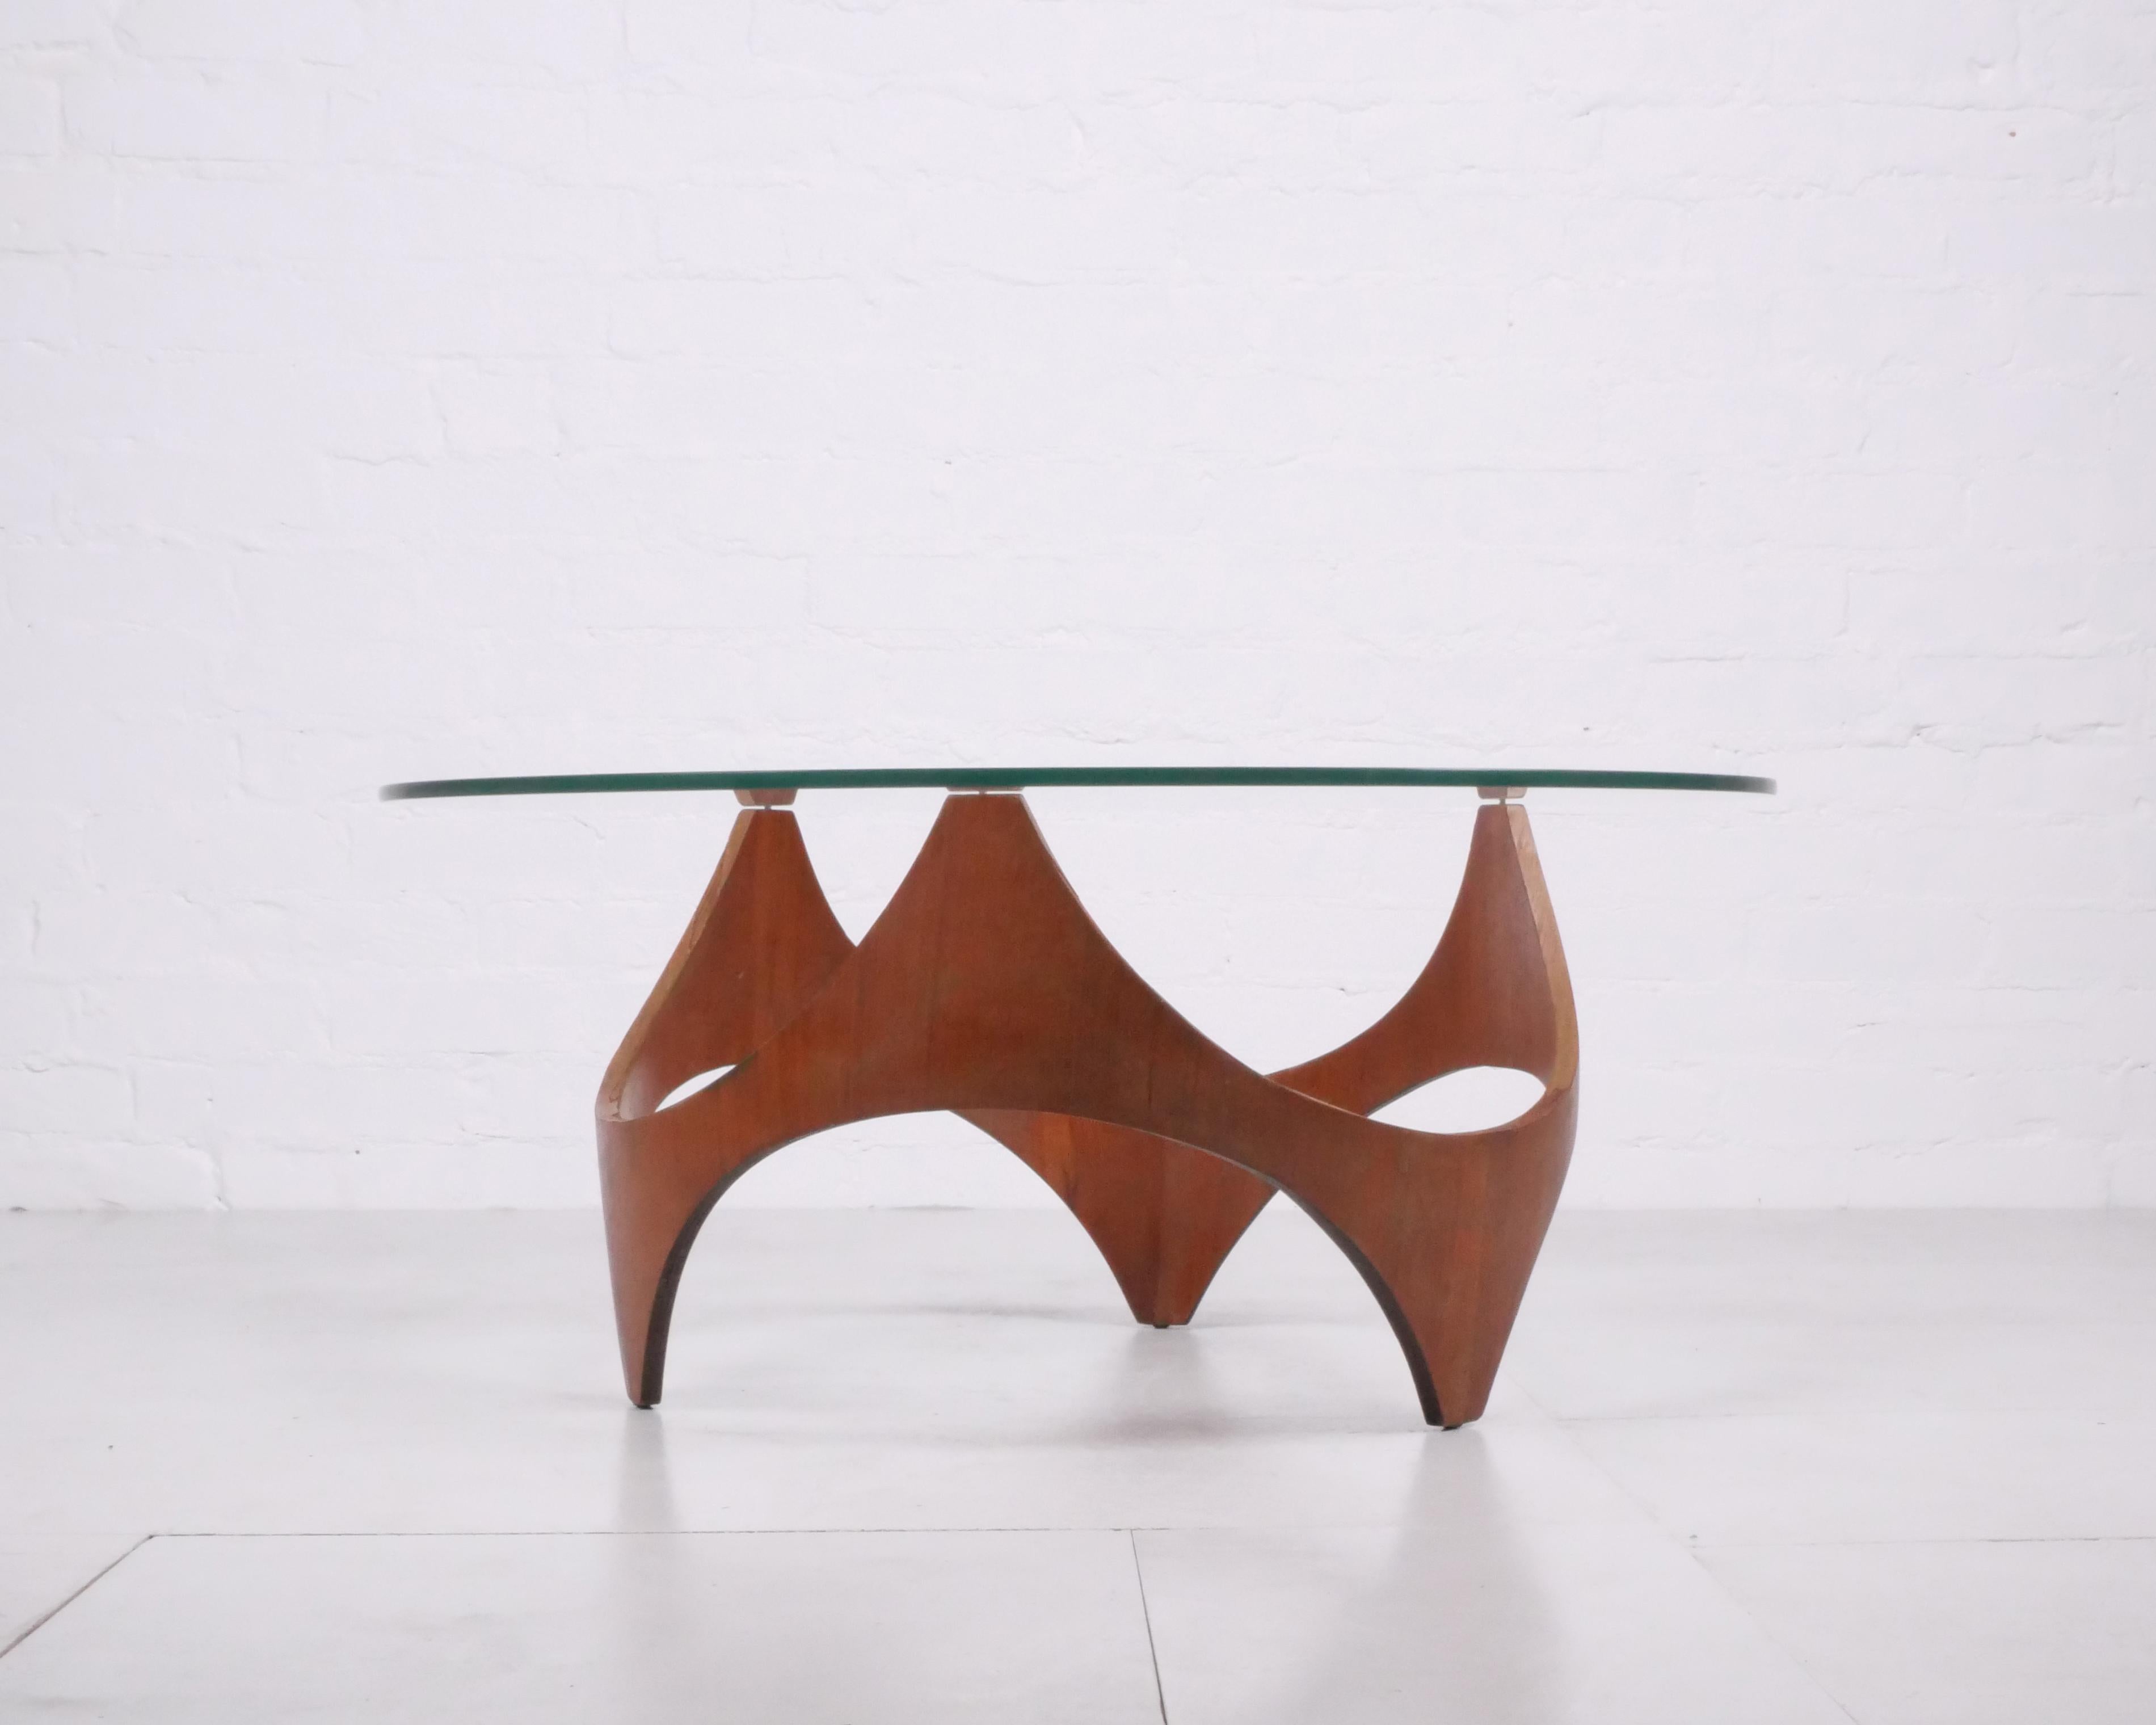 Molded Glass & Plywood Coffee Table, Style of Henry P Glass, Joe Colombo Gerald Summers